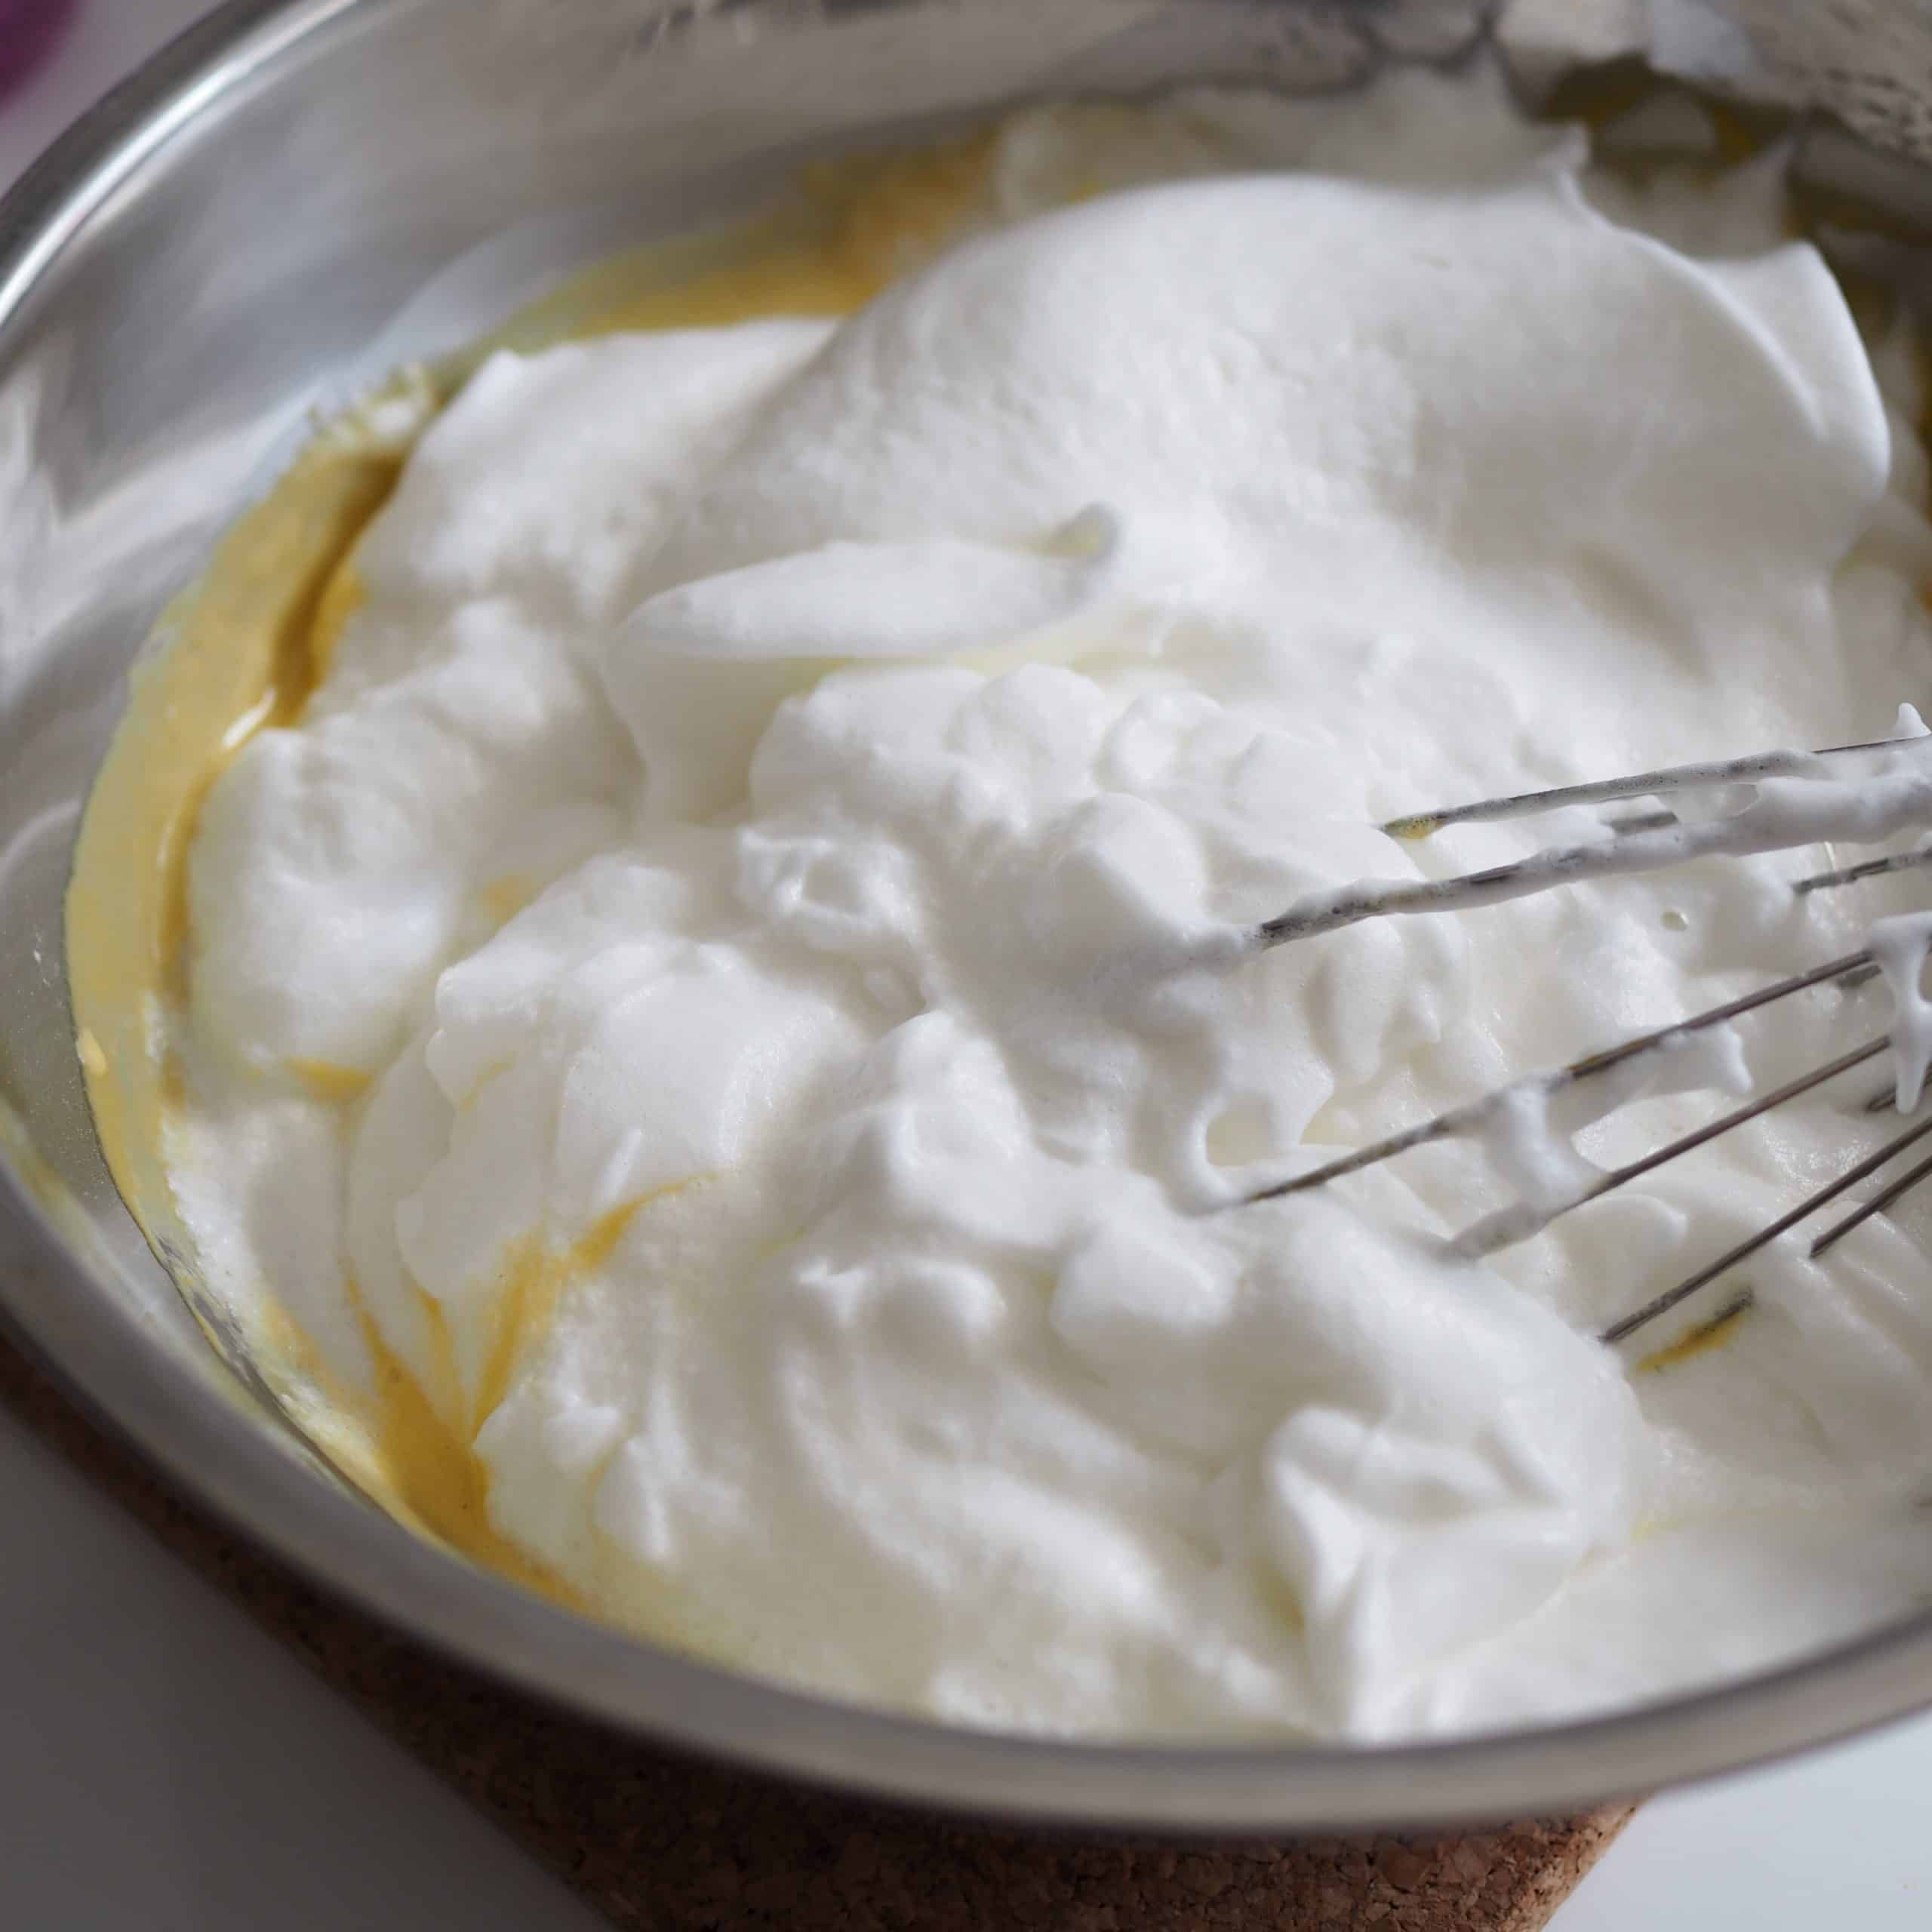 add all of the meringue 